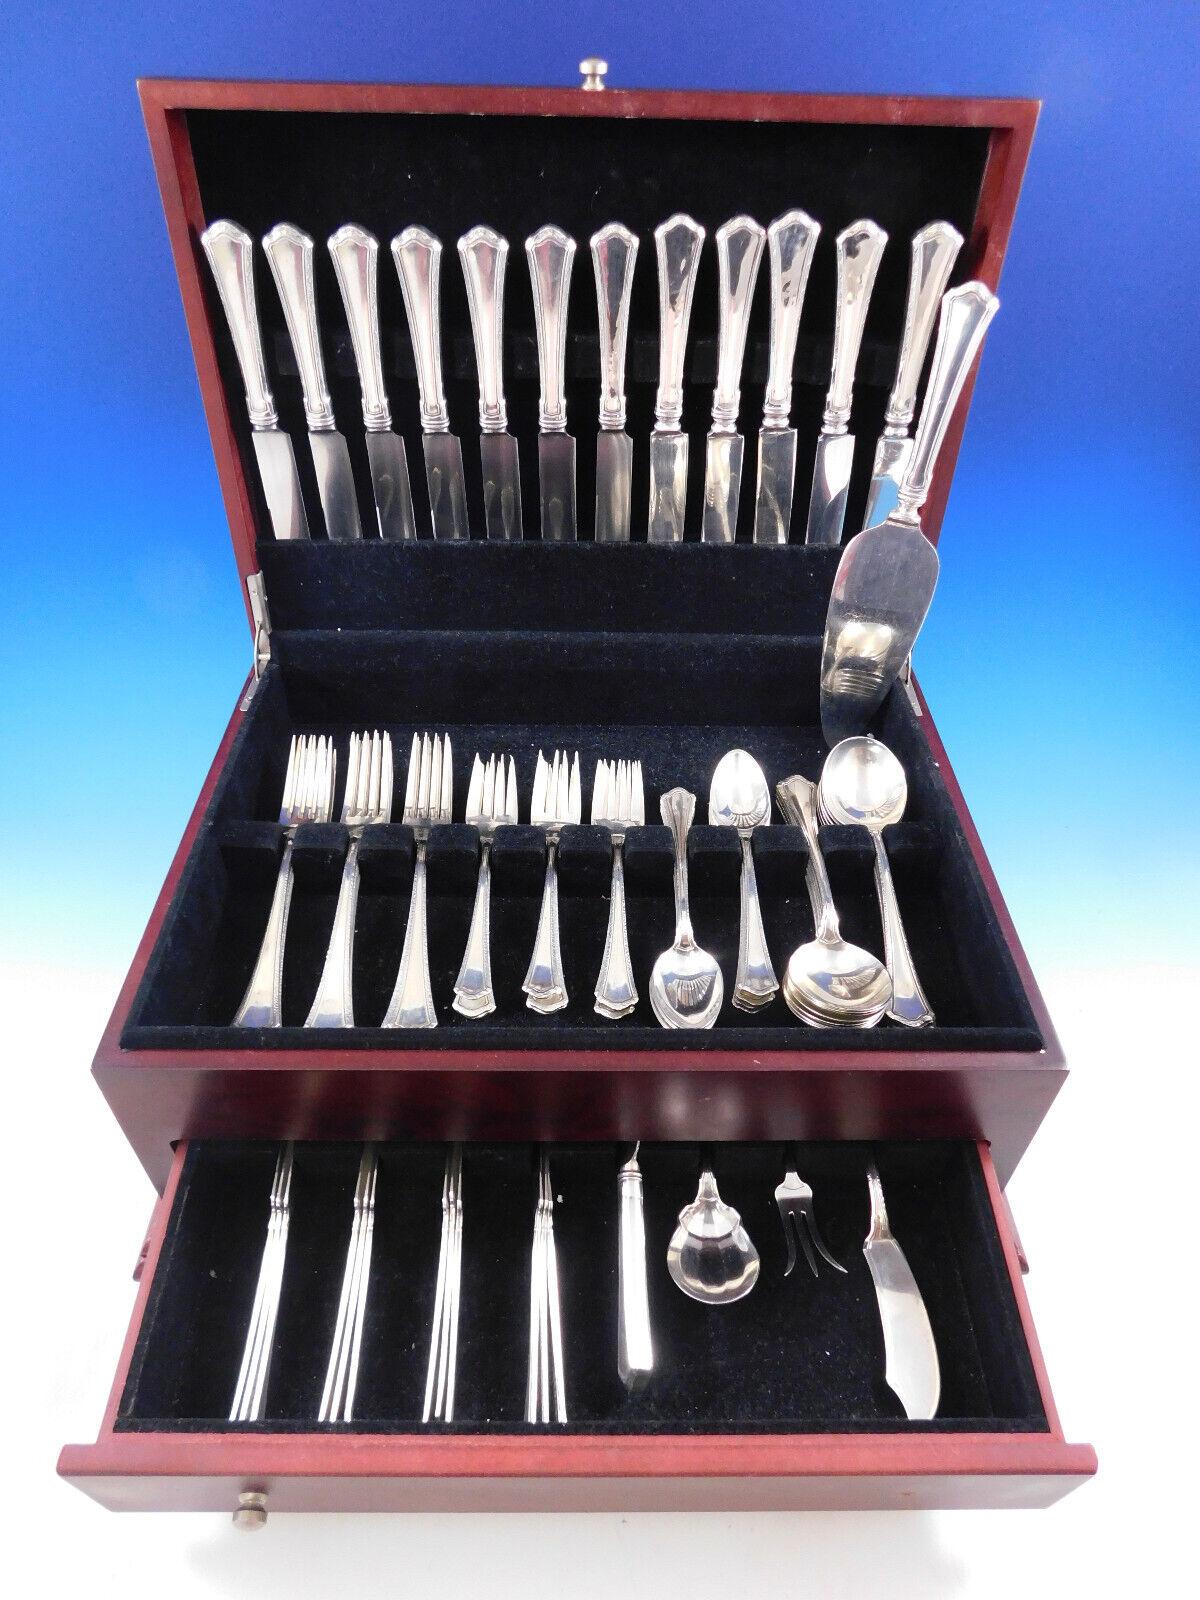 Madison by Wallace c1913 sterling silver flatware set - 77 pieces. This set includes:

12 Knives, 8 3/4